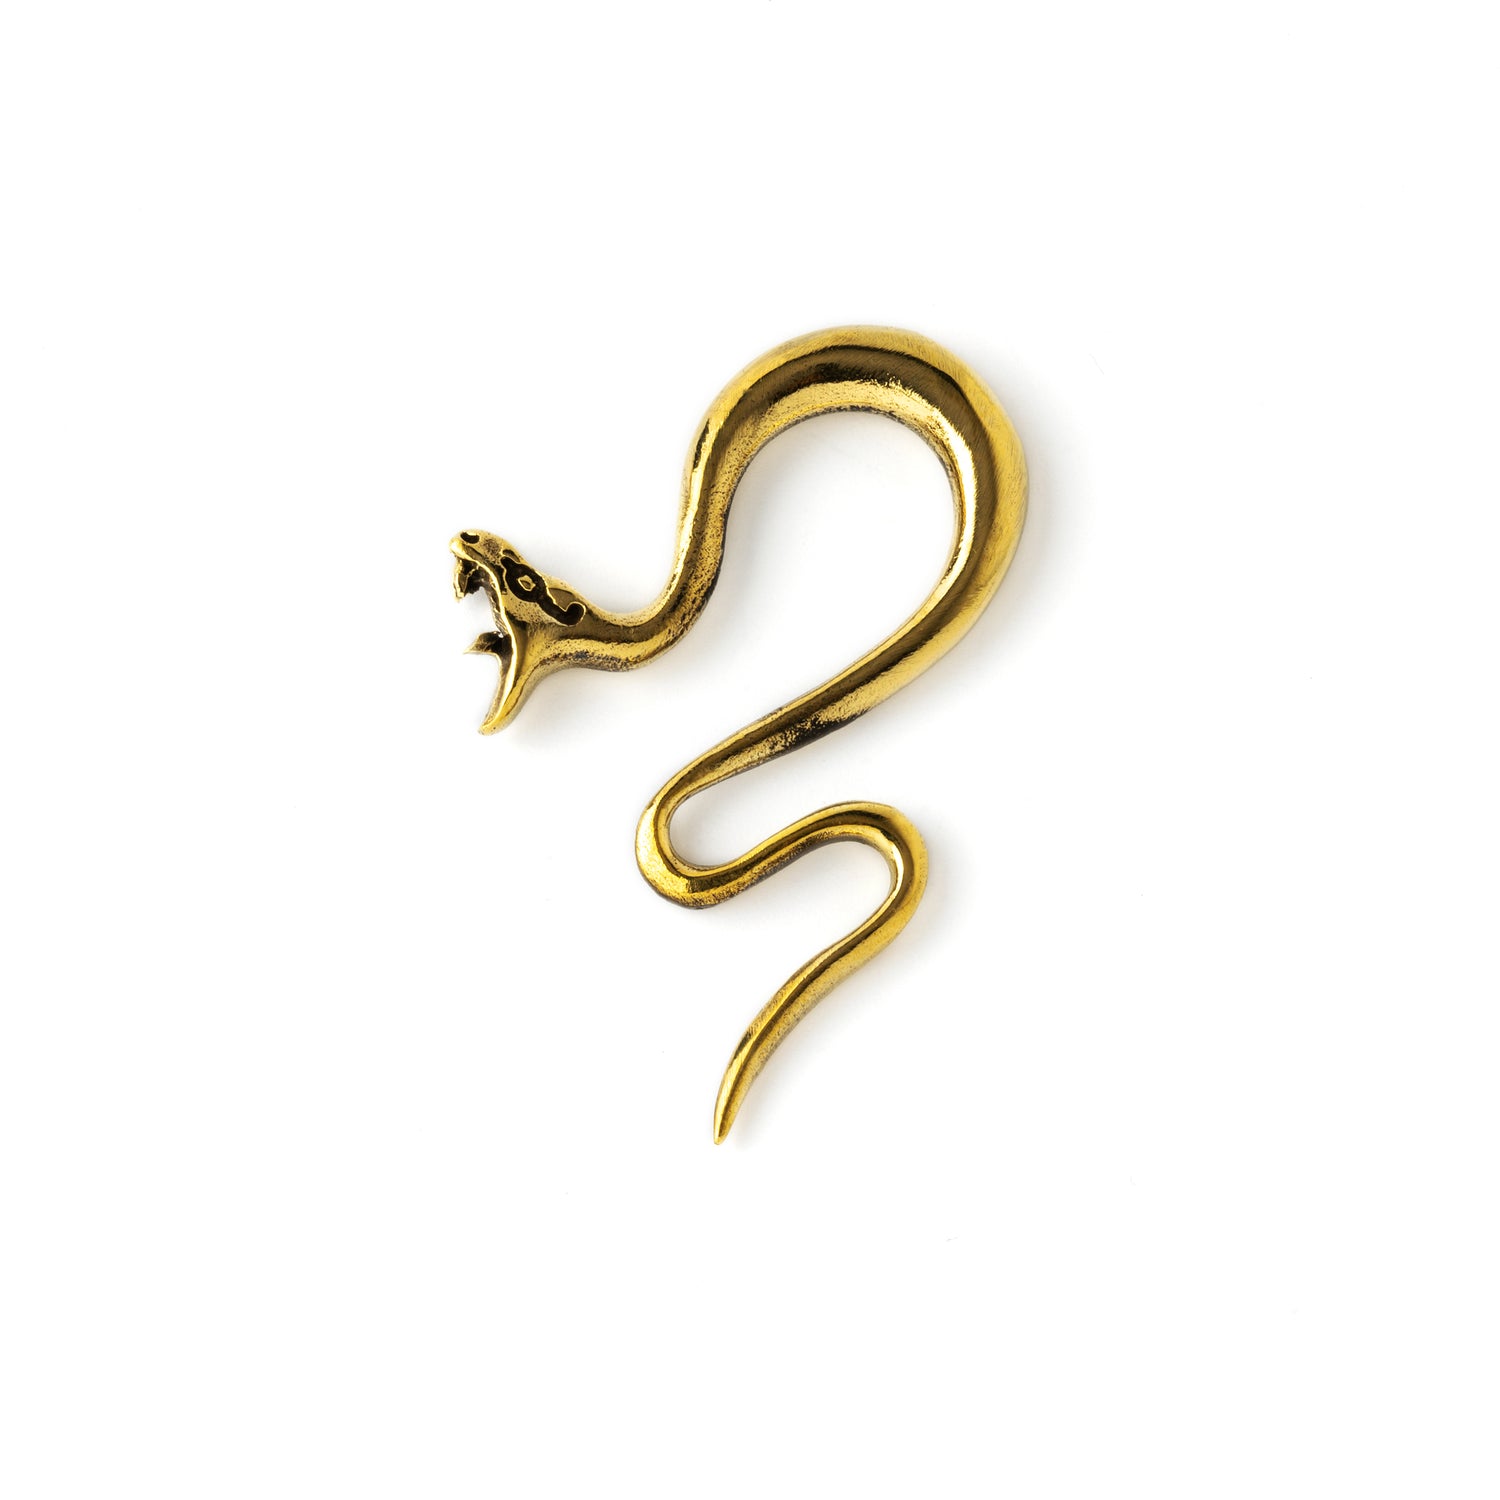 single gold brass serpent ear hangers stretchers for stretched ears frontal view